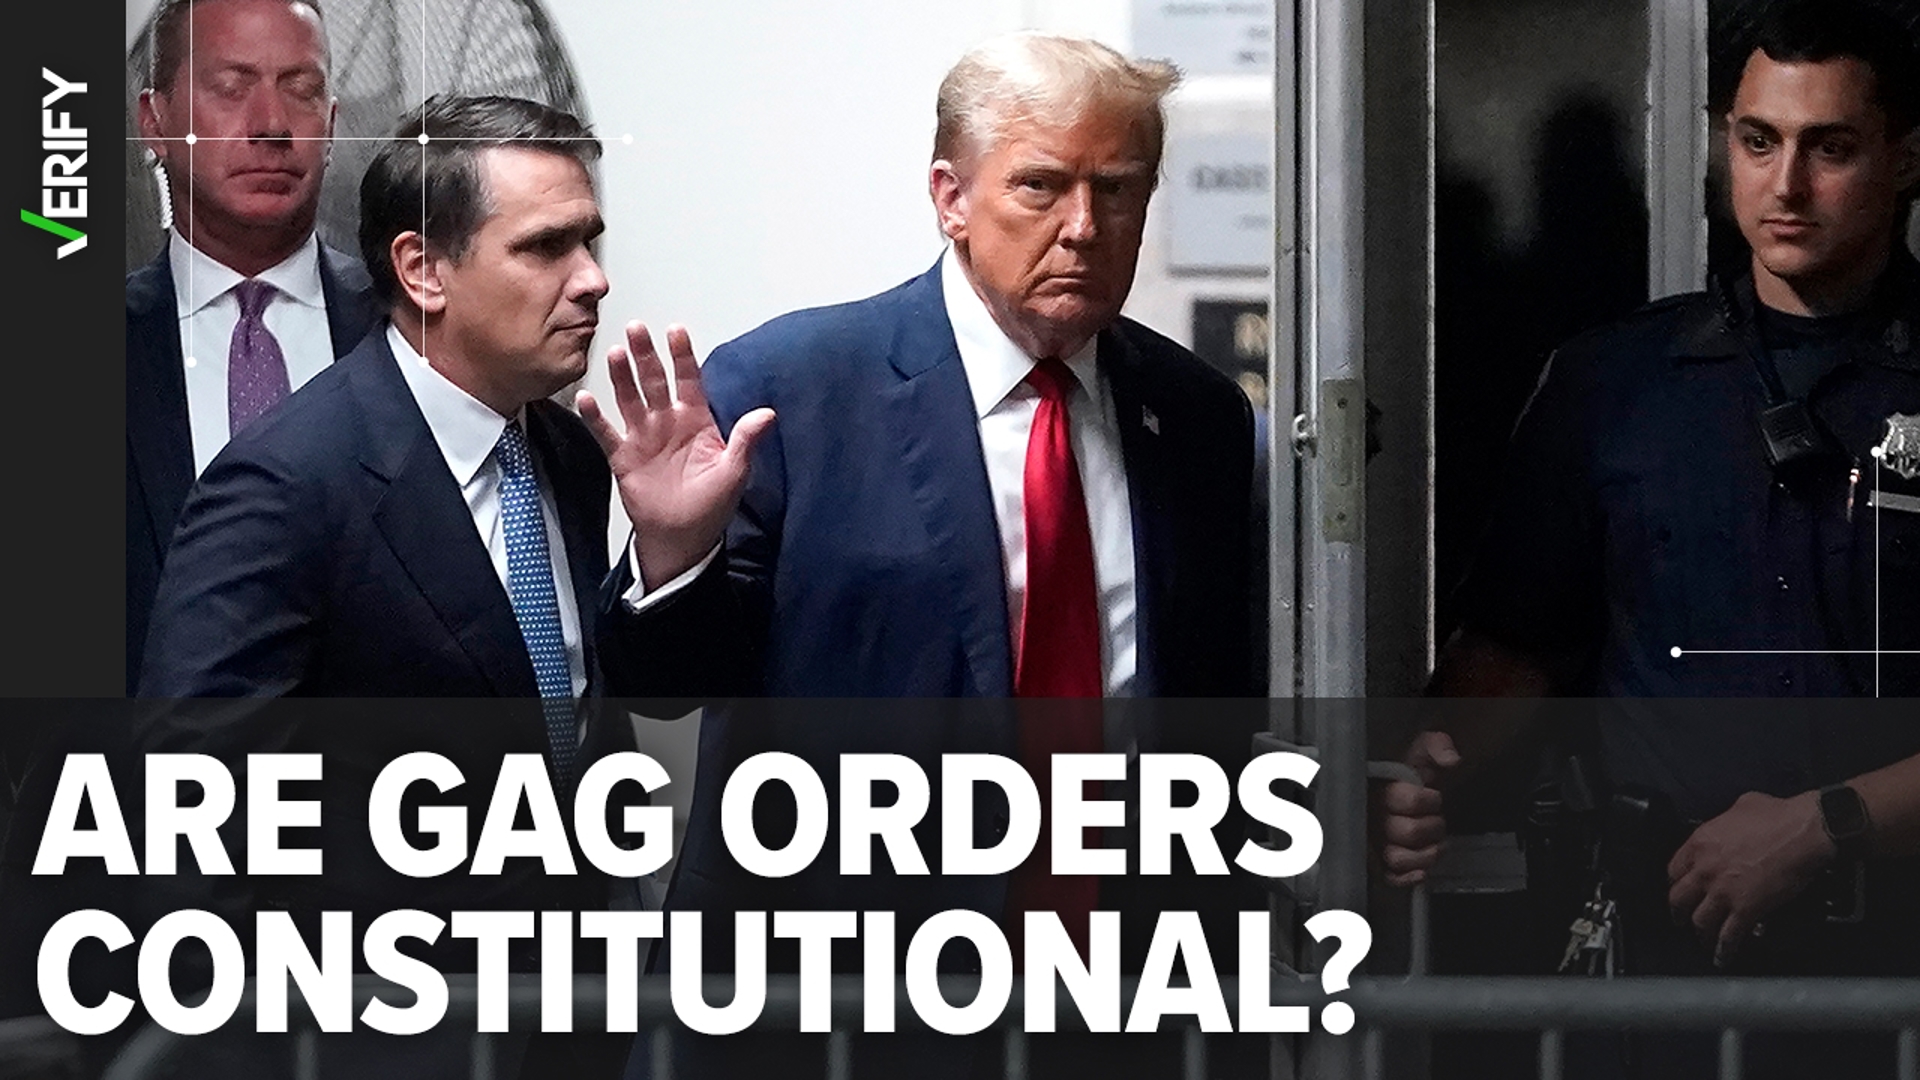 After Trump was fined for violating a gag order, VERIFY readers asked if gag orders violate the First Amendment. Here’s what the Supreme Court has said.